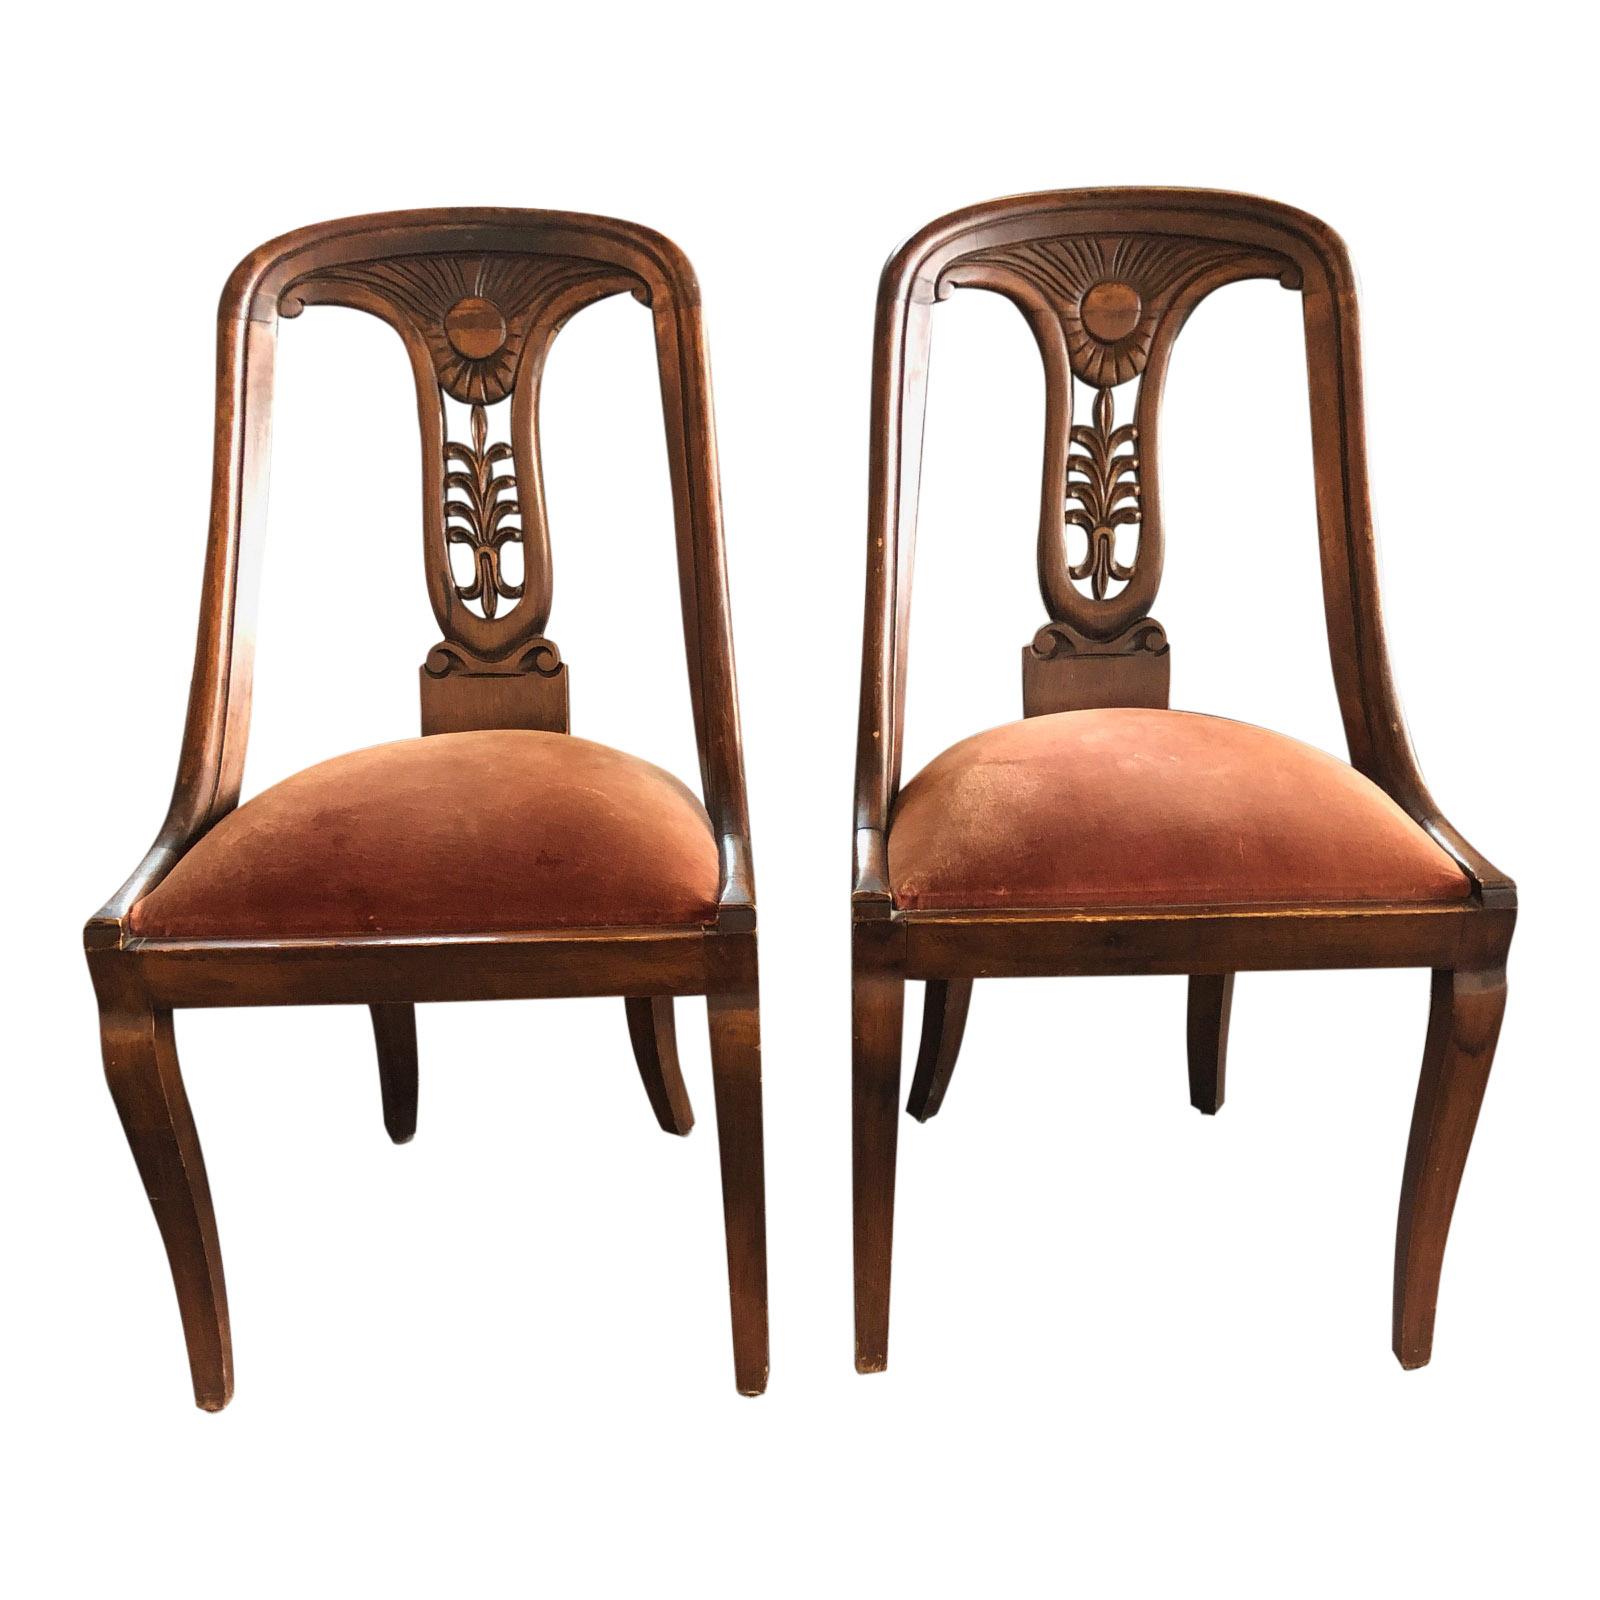 Set of Two Antique Empire Mahogany Gondola Chairs In Fair Condition For Sale In Haarlem, Noord Holland